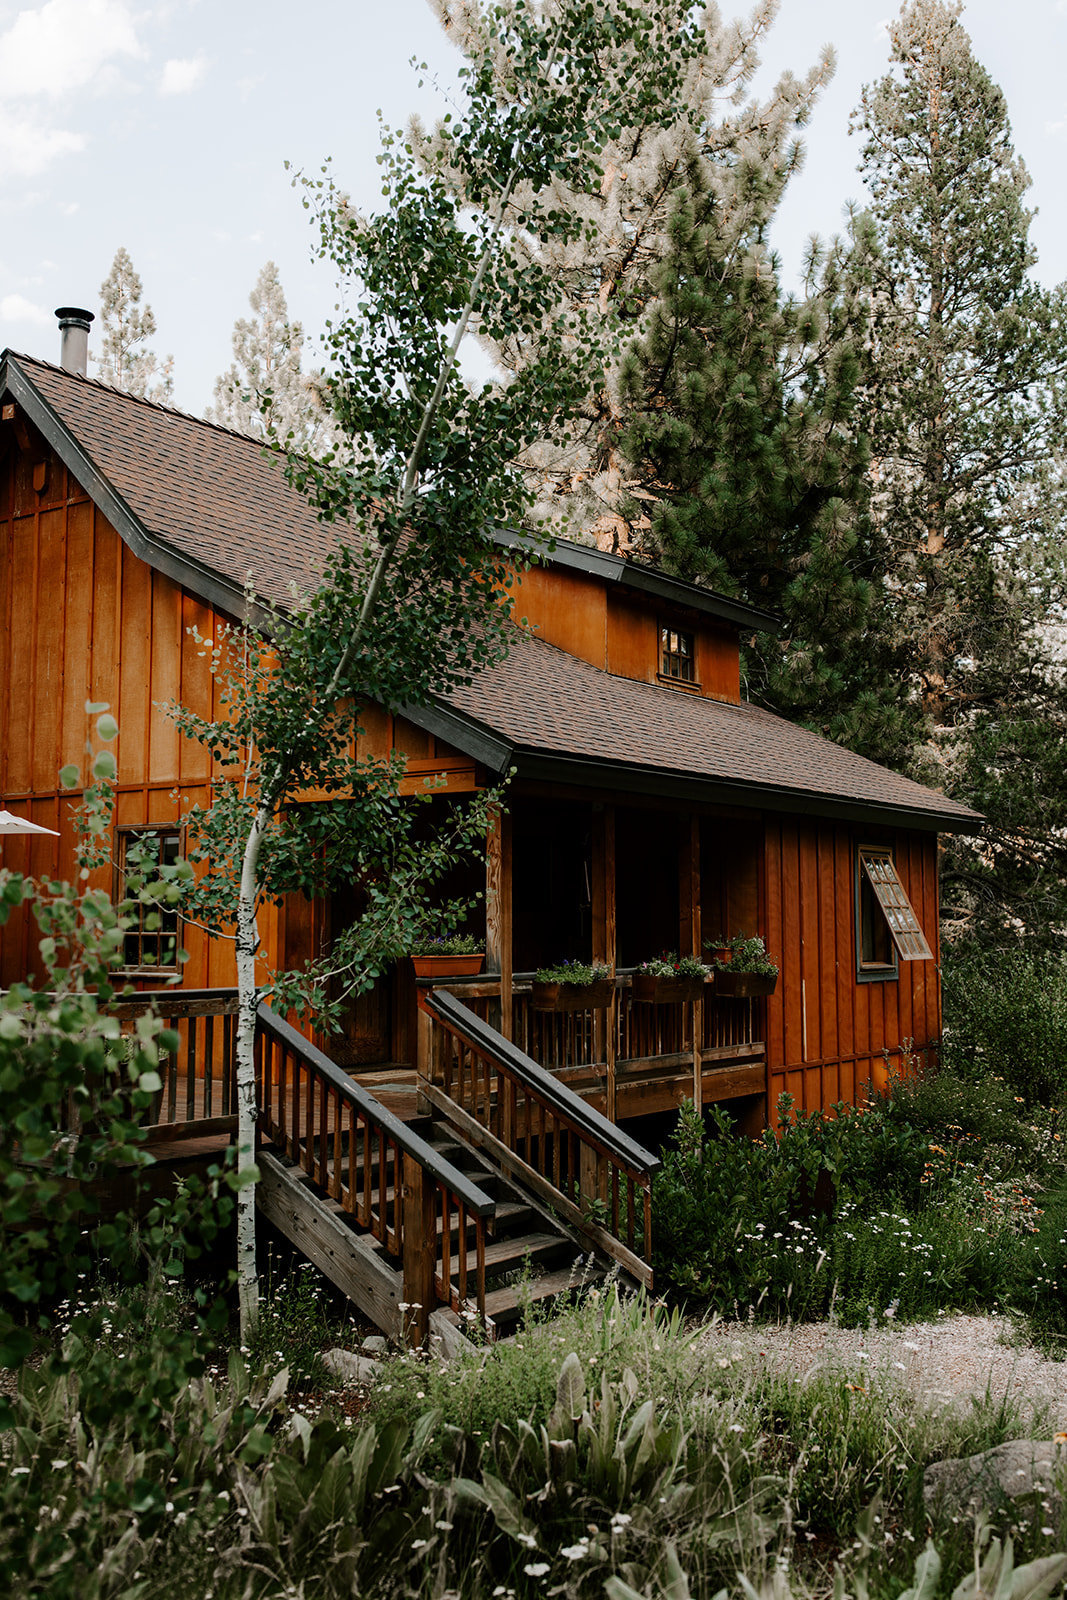 Truckee Wedding Planners log cabin at wedding venue Mitchells Mountain Meadows Sierraville near Truckee, Joy of Life Events image by The Shepards Photography